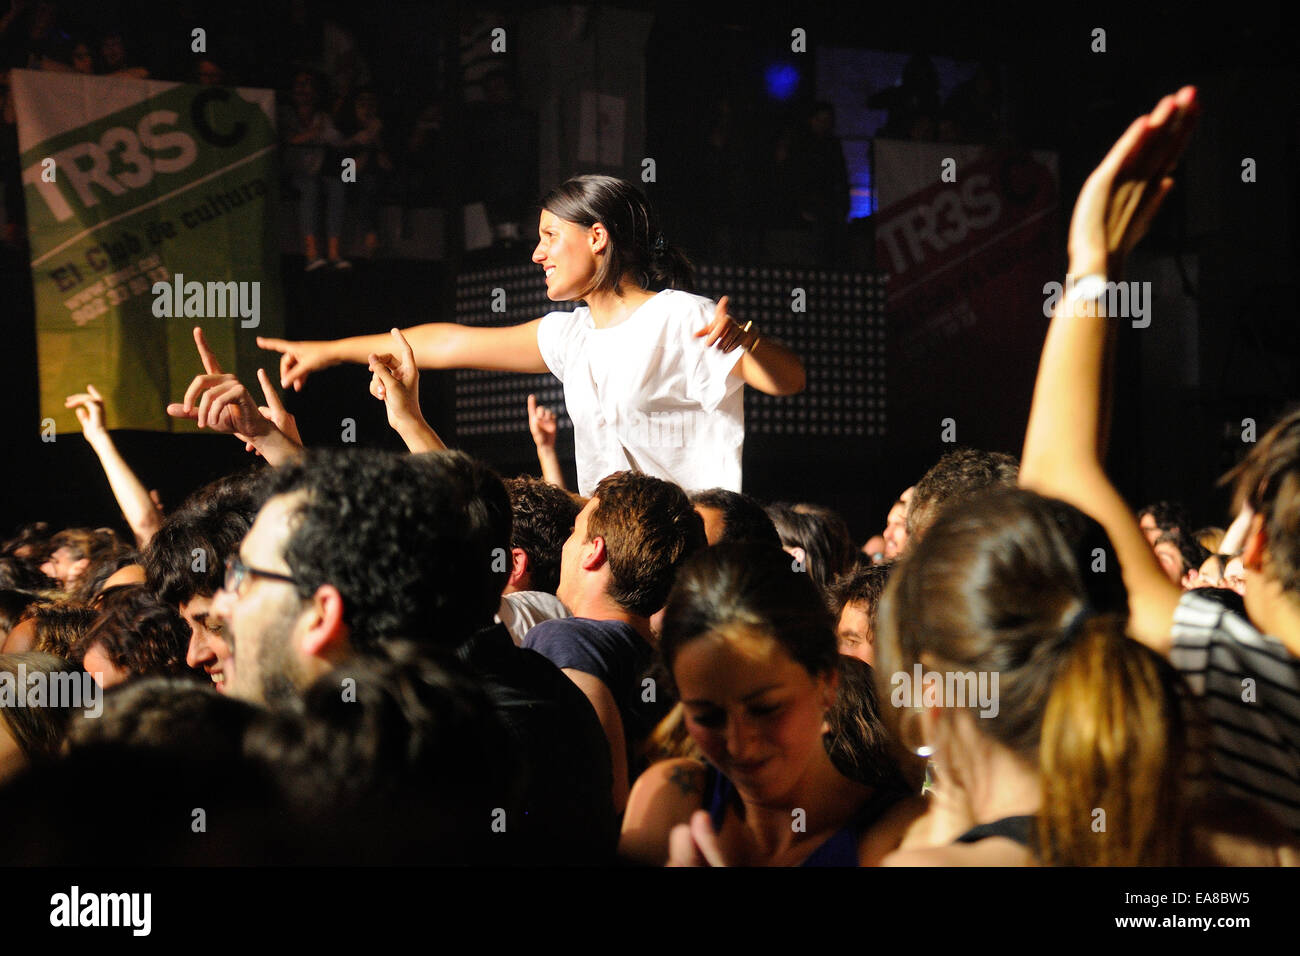 BARCELONA - MAY 16: A girl stands over the crowd in a concert at Razzmatazz discotheque on May 16, 2014 in Barcelona, Spain. Stock Photo